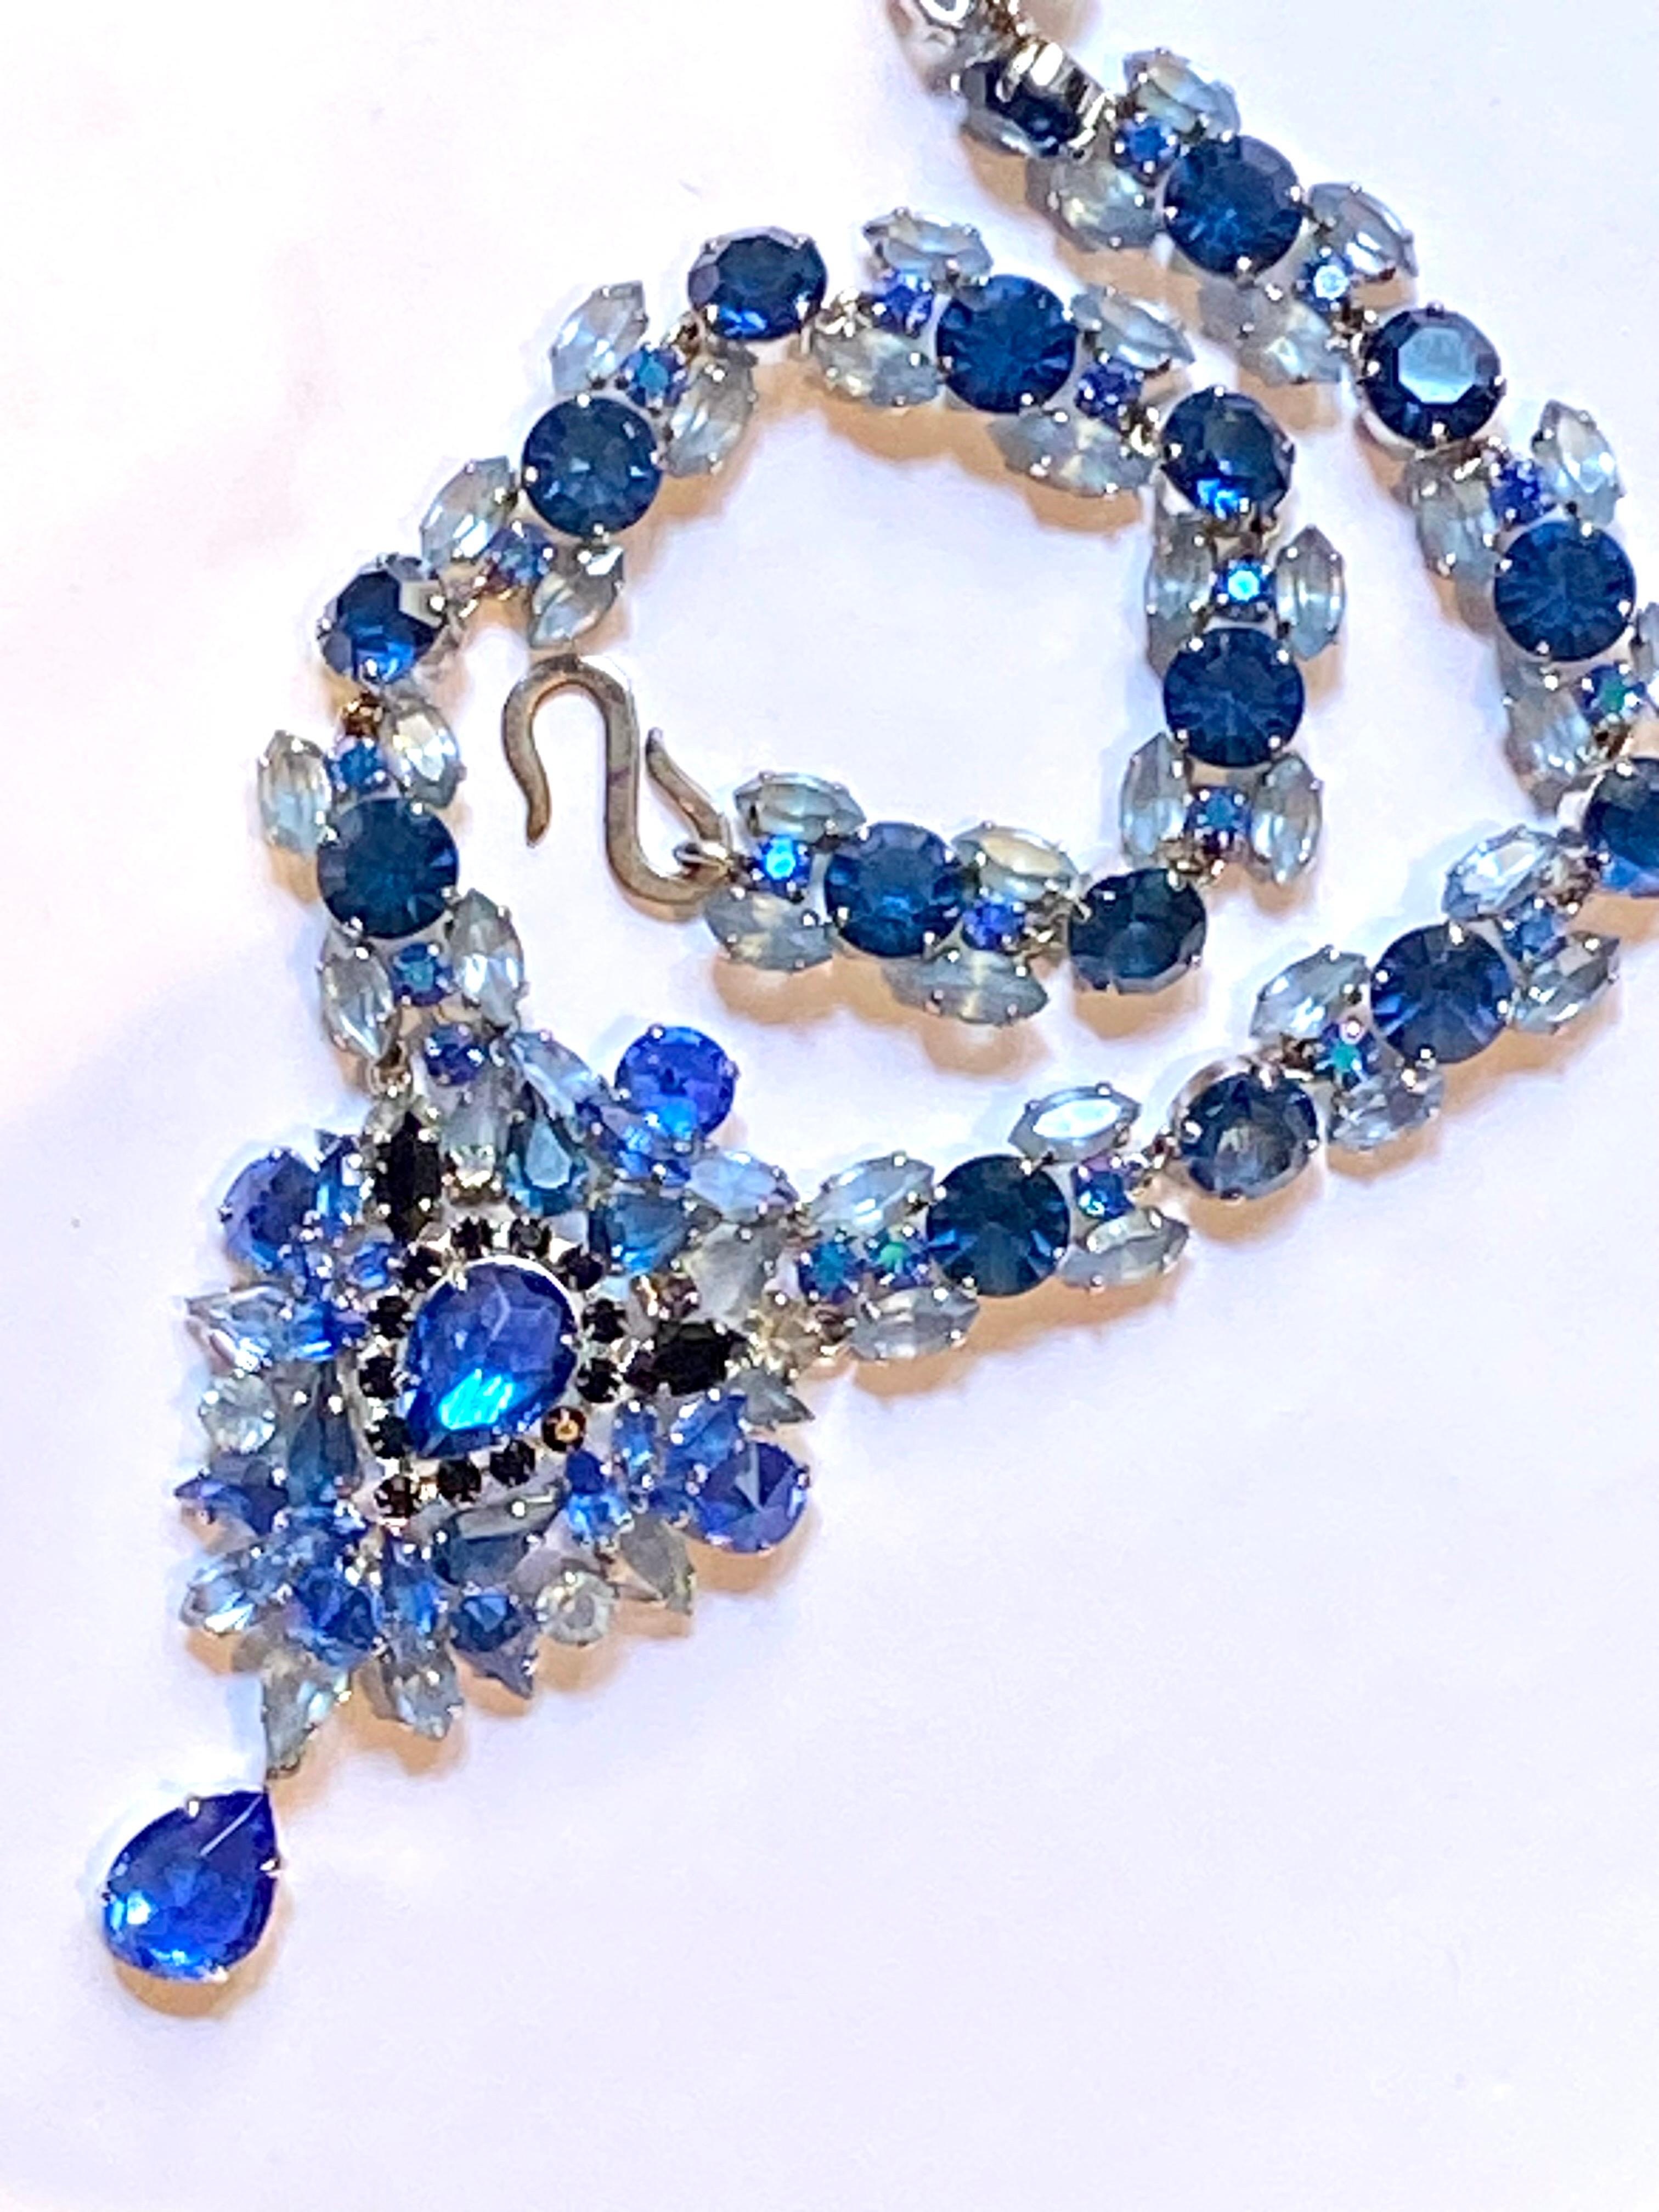 Women's Christian Dior 1959 Shades of Blue Rhinestone Necklace by Henkel & Grosse'